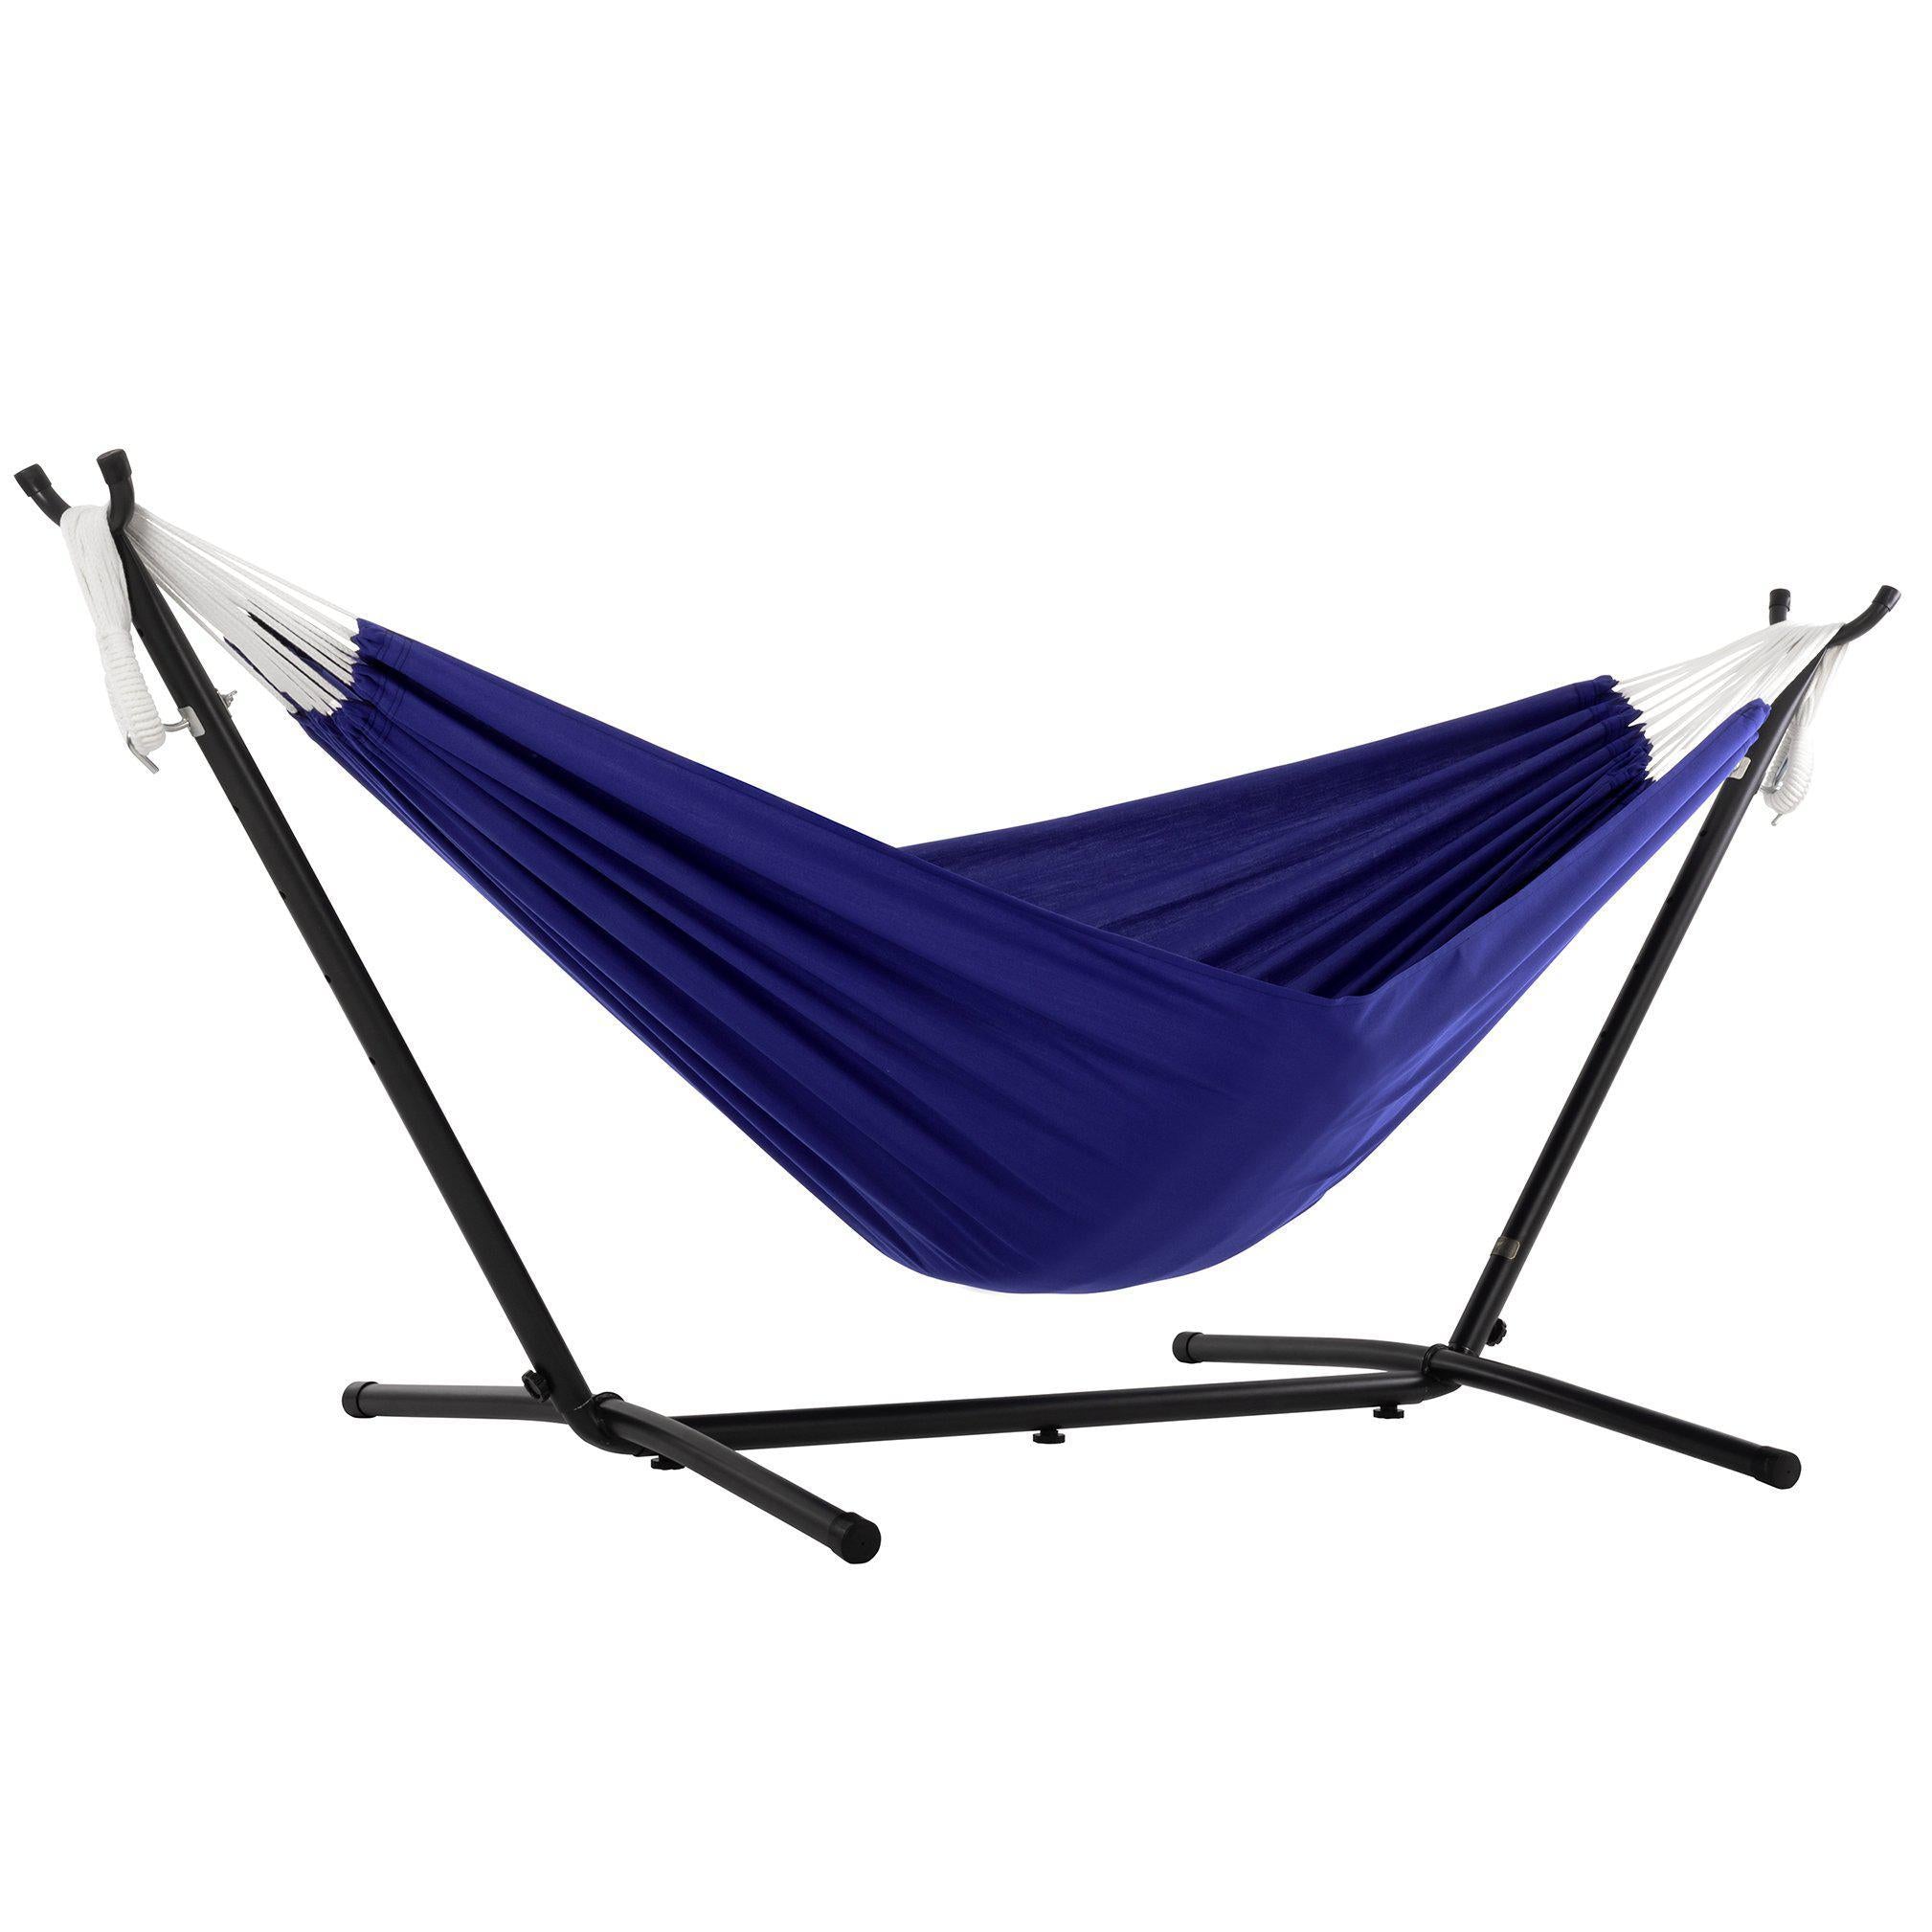 polyester double hammock with stand in royal blue colour 2 7m